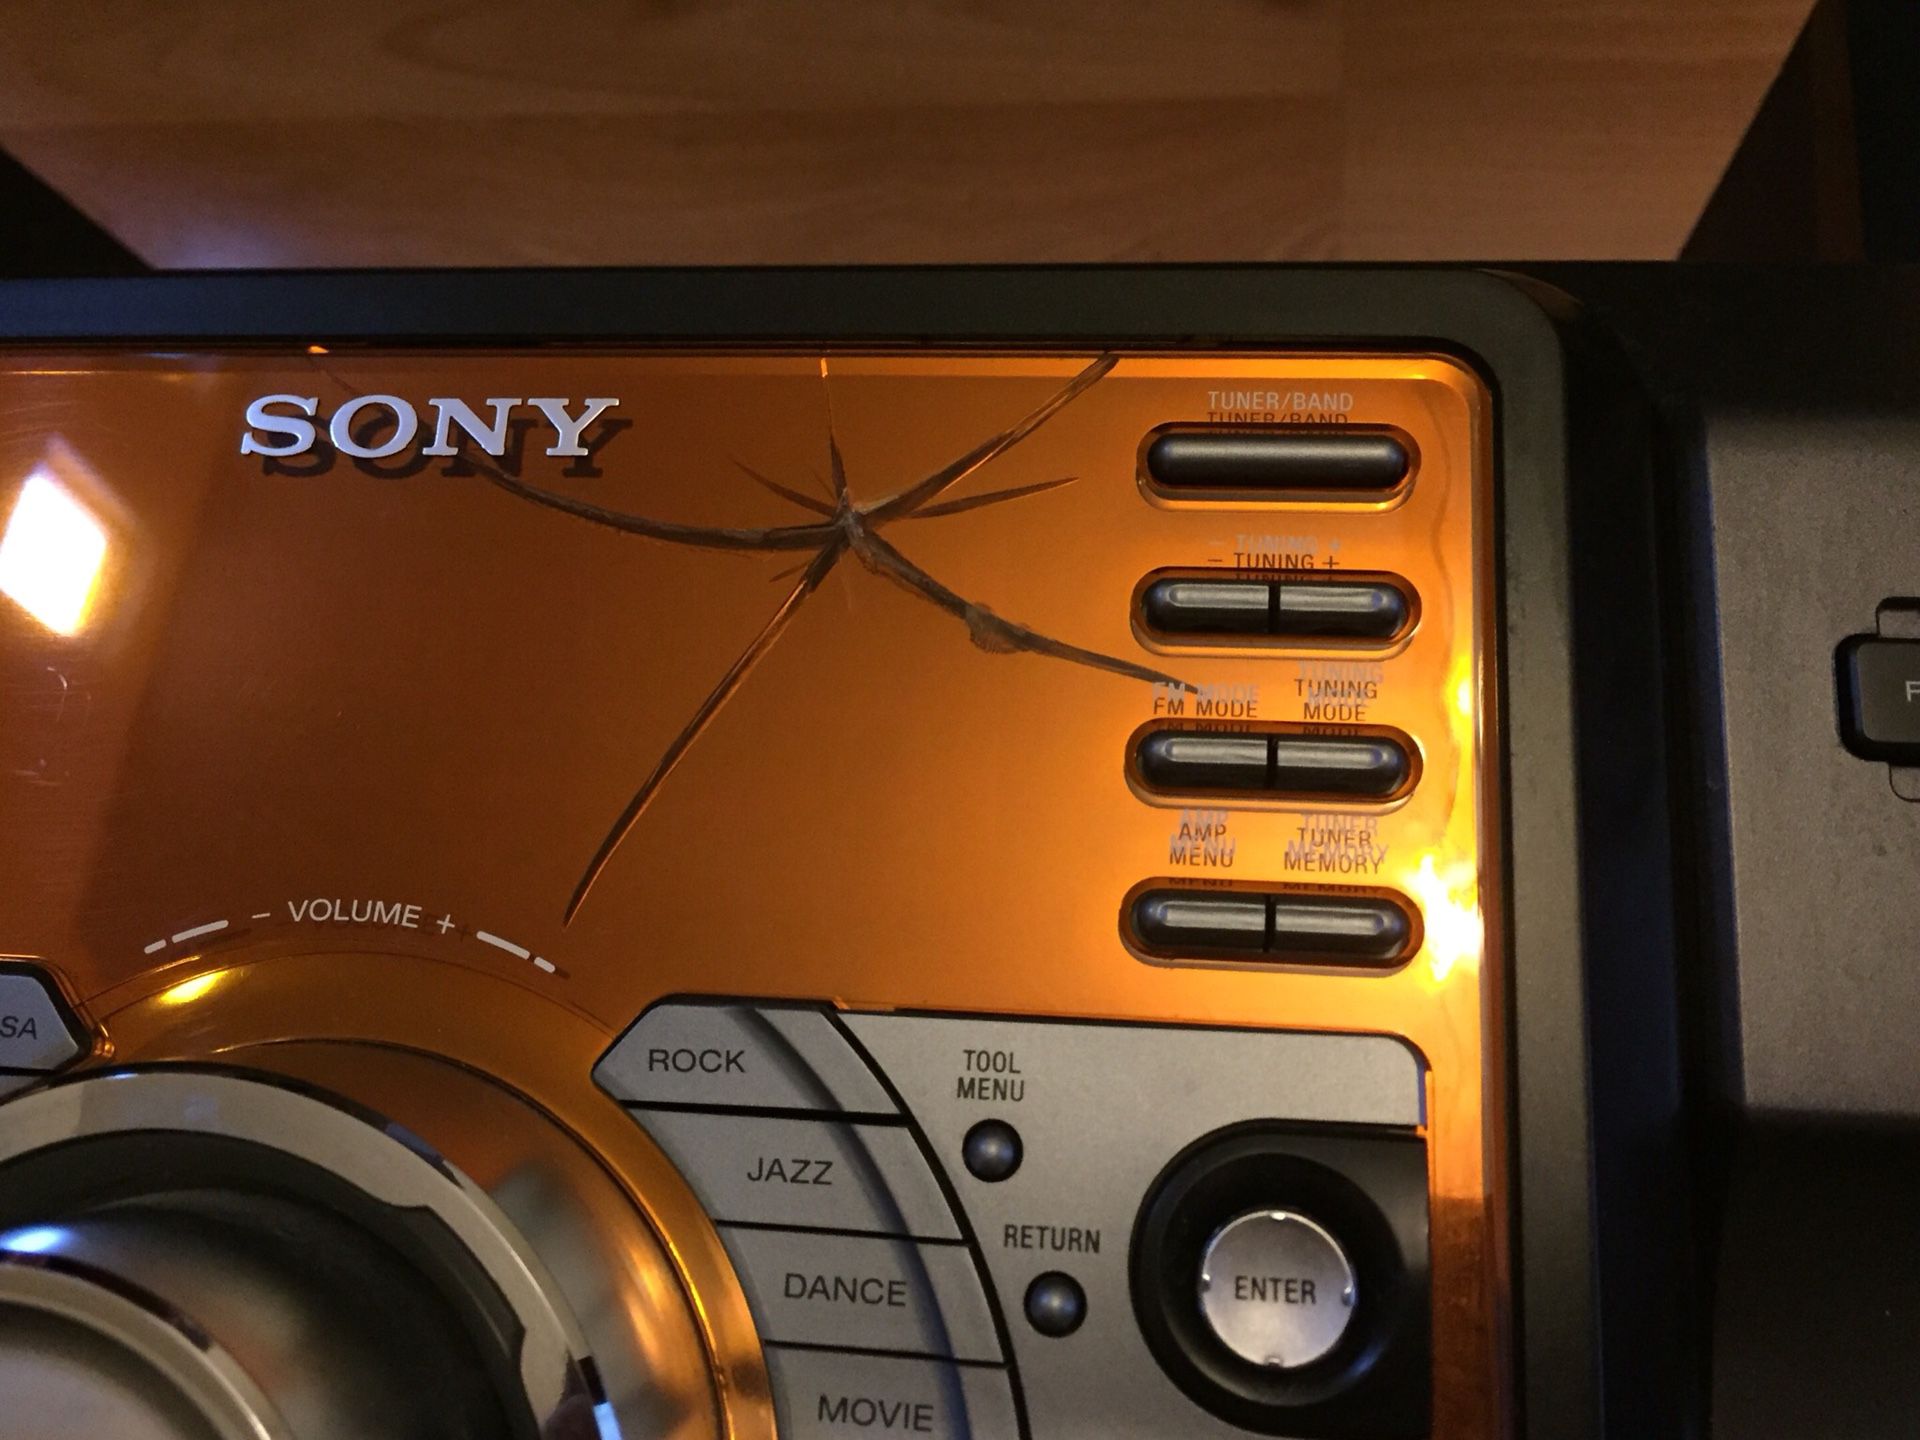 Sony Stereo System LBT-ZX66i - Has Cracked Display for Sale in 